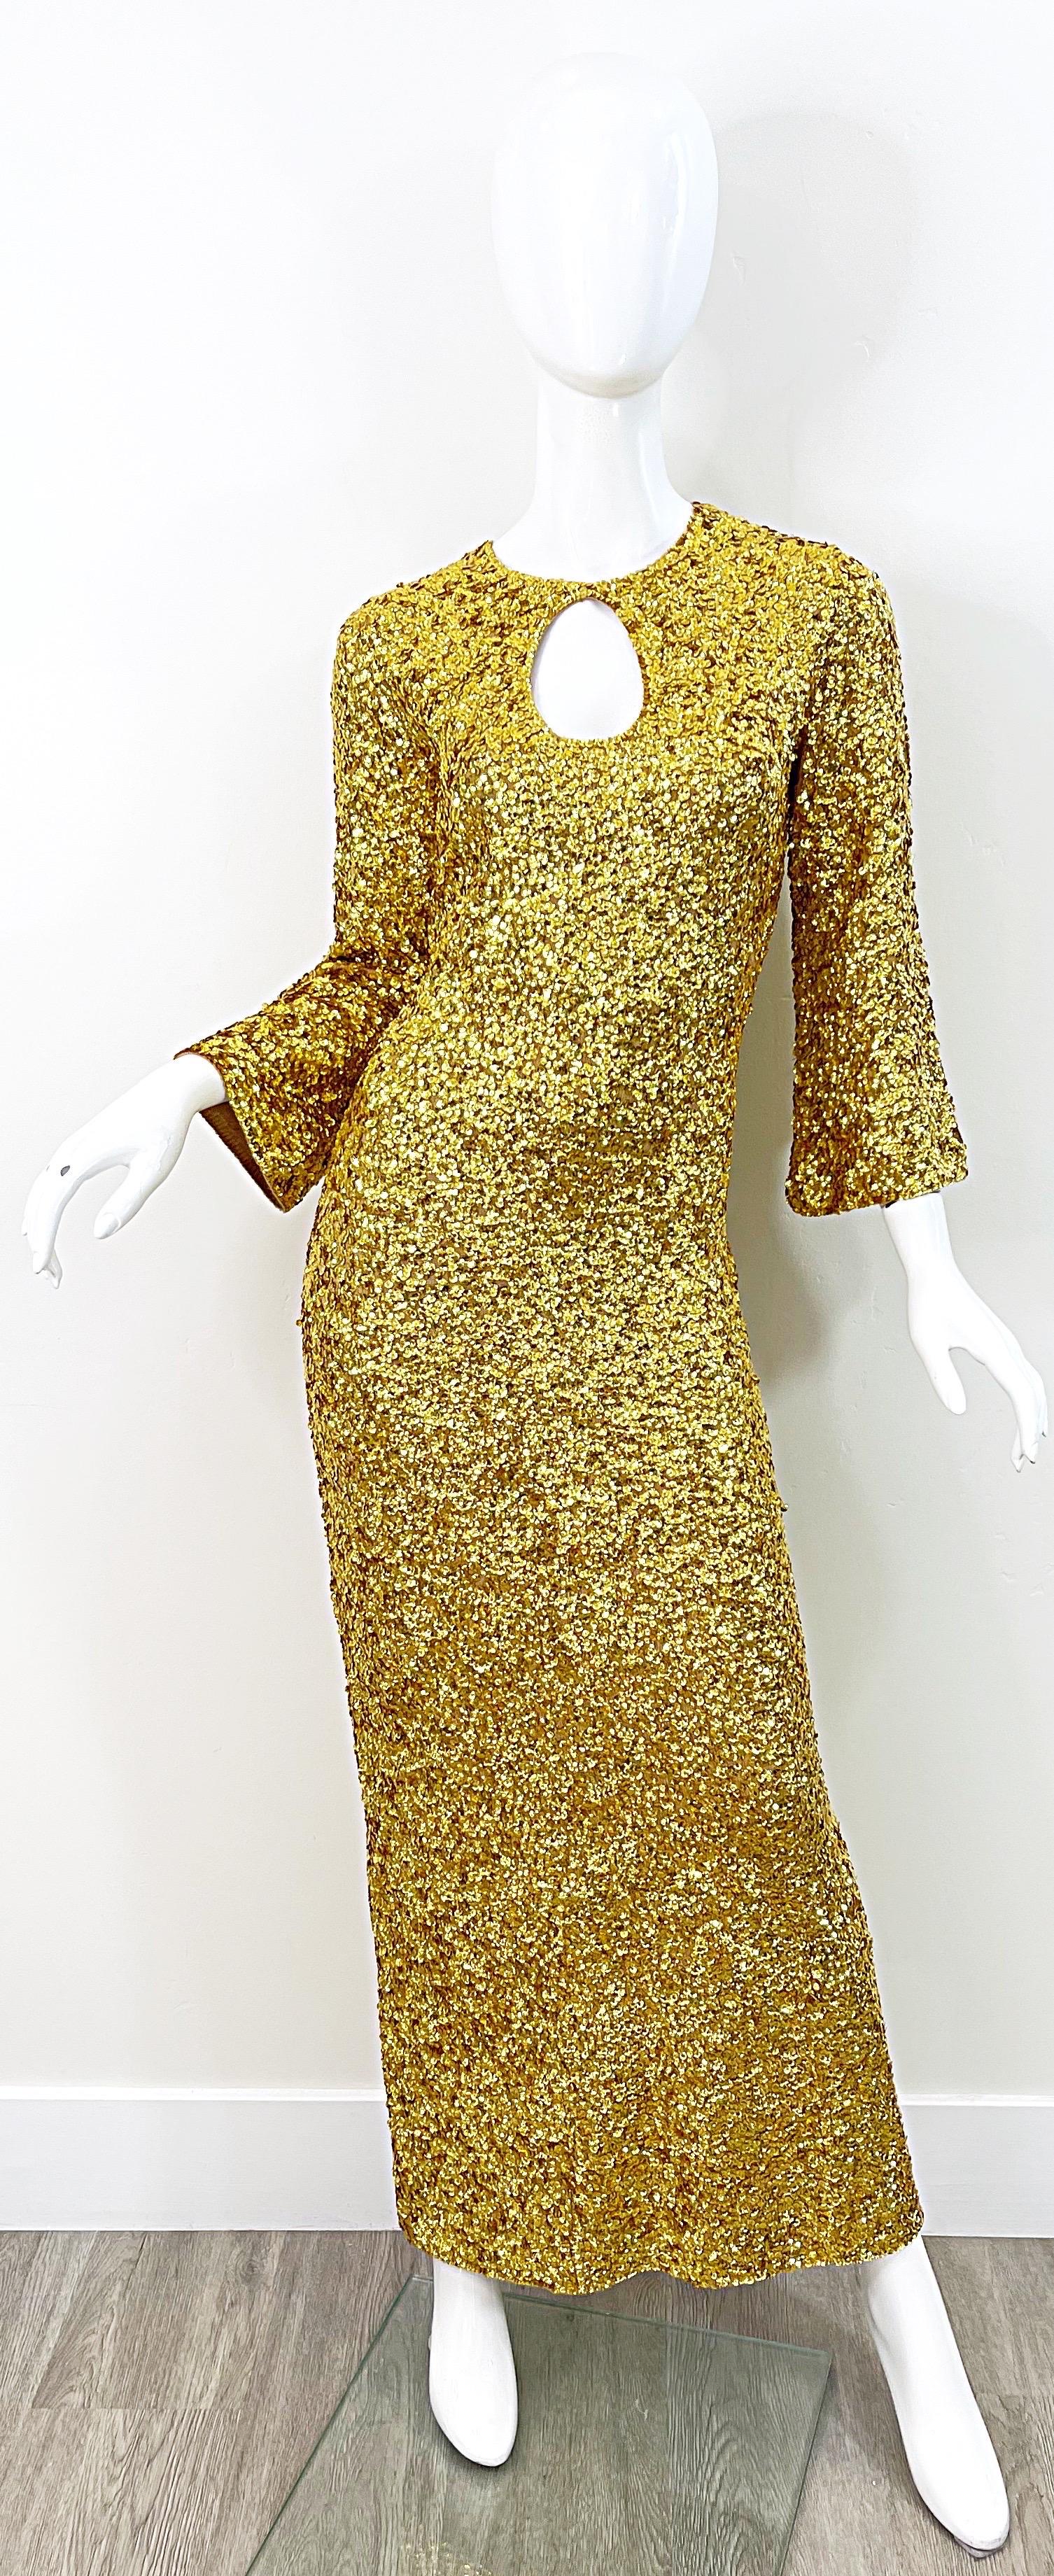 Phenomenal early 60s GENE SHELLY’S International Boutique International gold sequined full length dress ! Features thousands of hand-sewn sequins on a soft stretchy wool. Keyhole opening under center neck. Full metal zipper up the back with